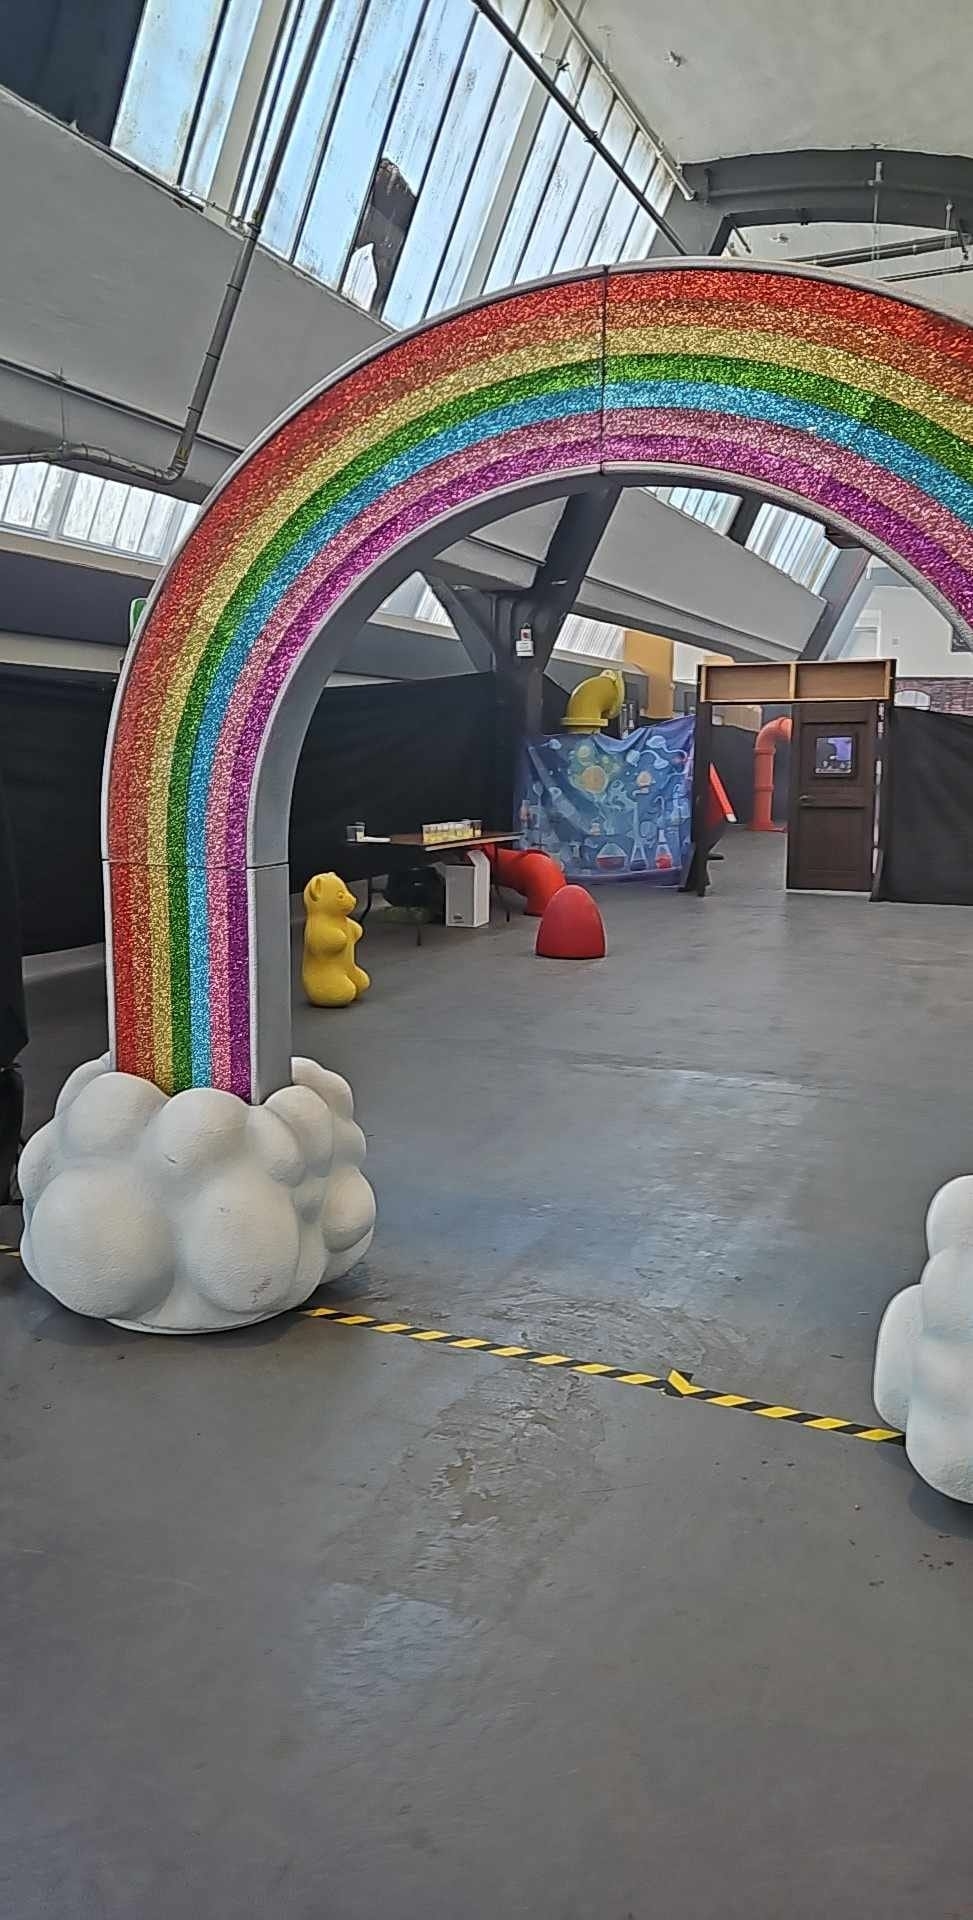 A rainbow arch installation in an indoor industrial space